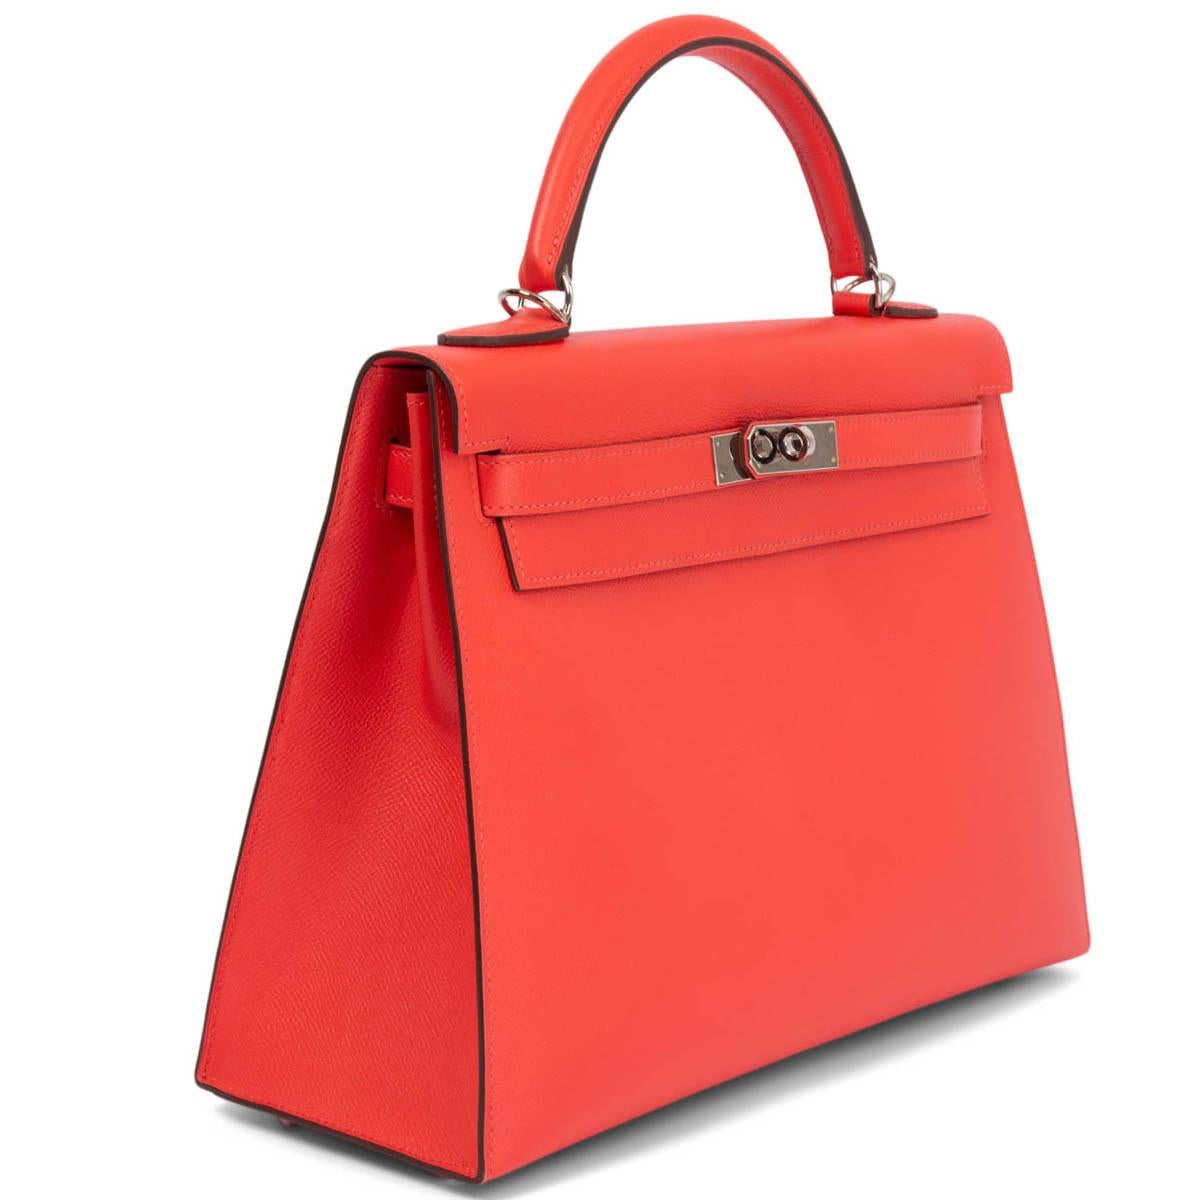 100% authentic Hermes Kelly II 32 Sellier bag in Rose Jaipur (coral pink) Veau Epsom leather with palladium hardware. Lined in Cherve (goat skin) with two open pockets against the front and a zipper pocket against the back. Has been carried with